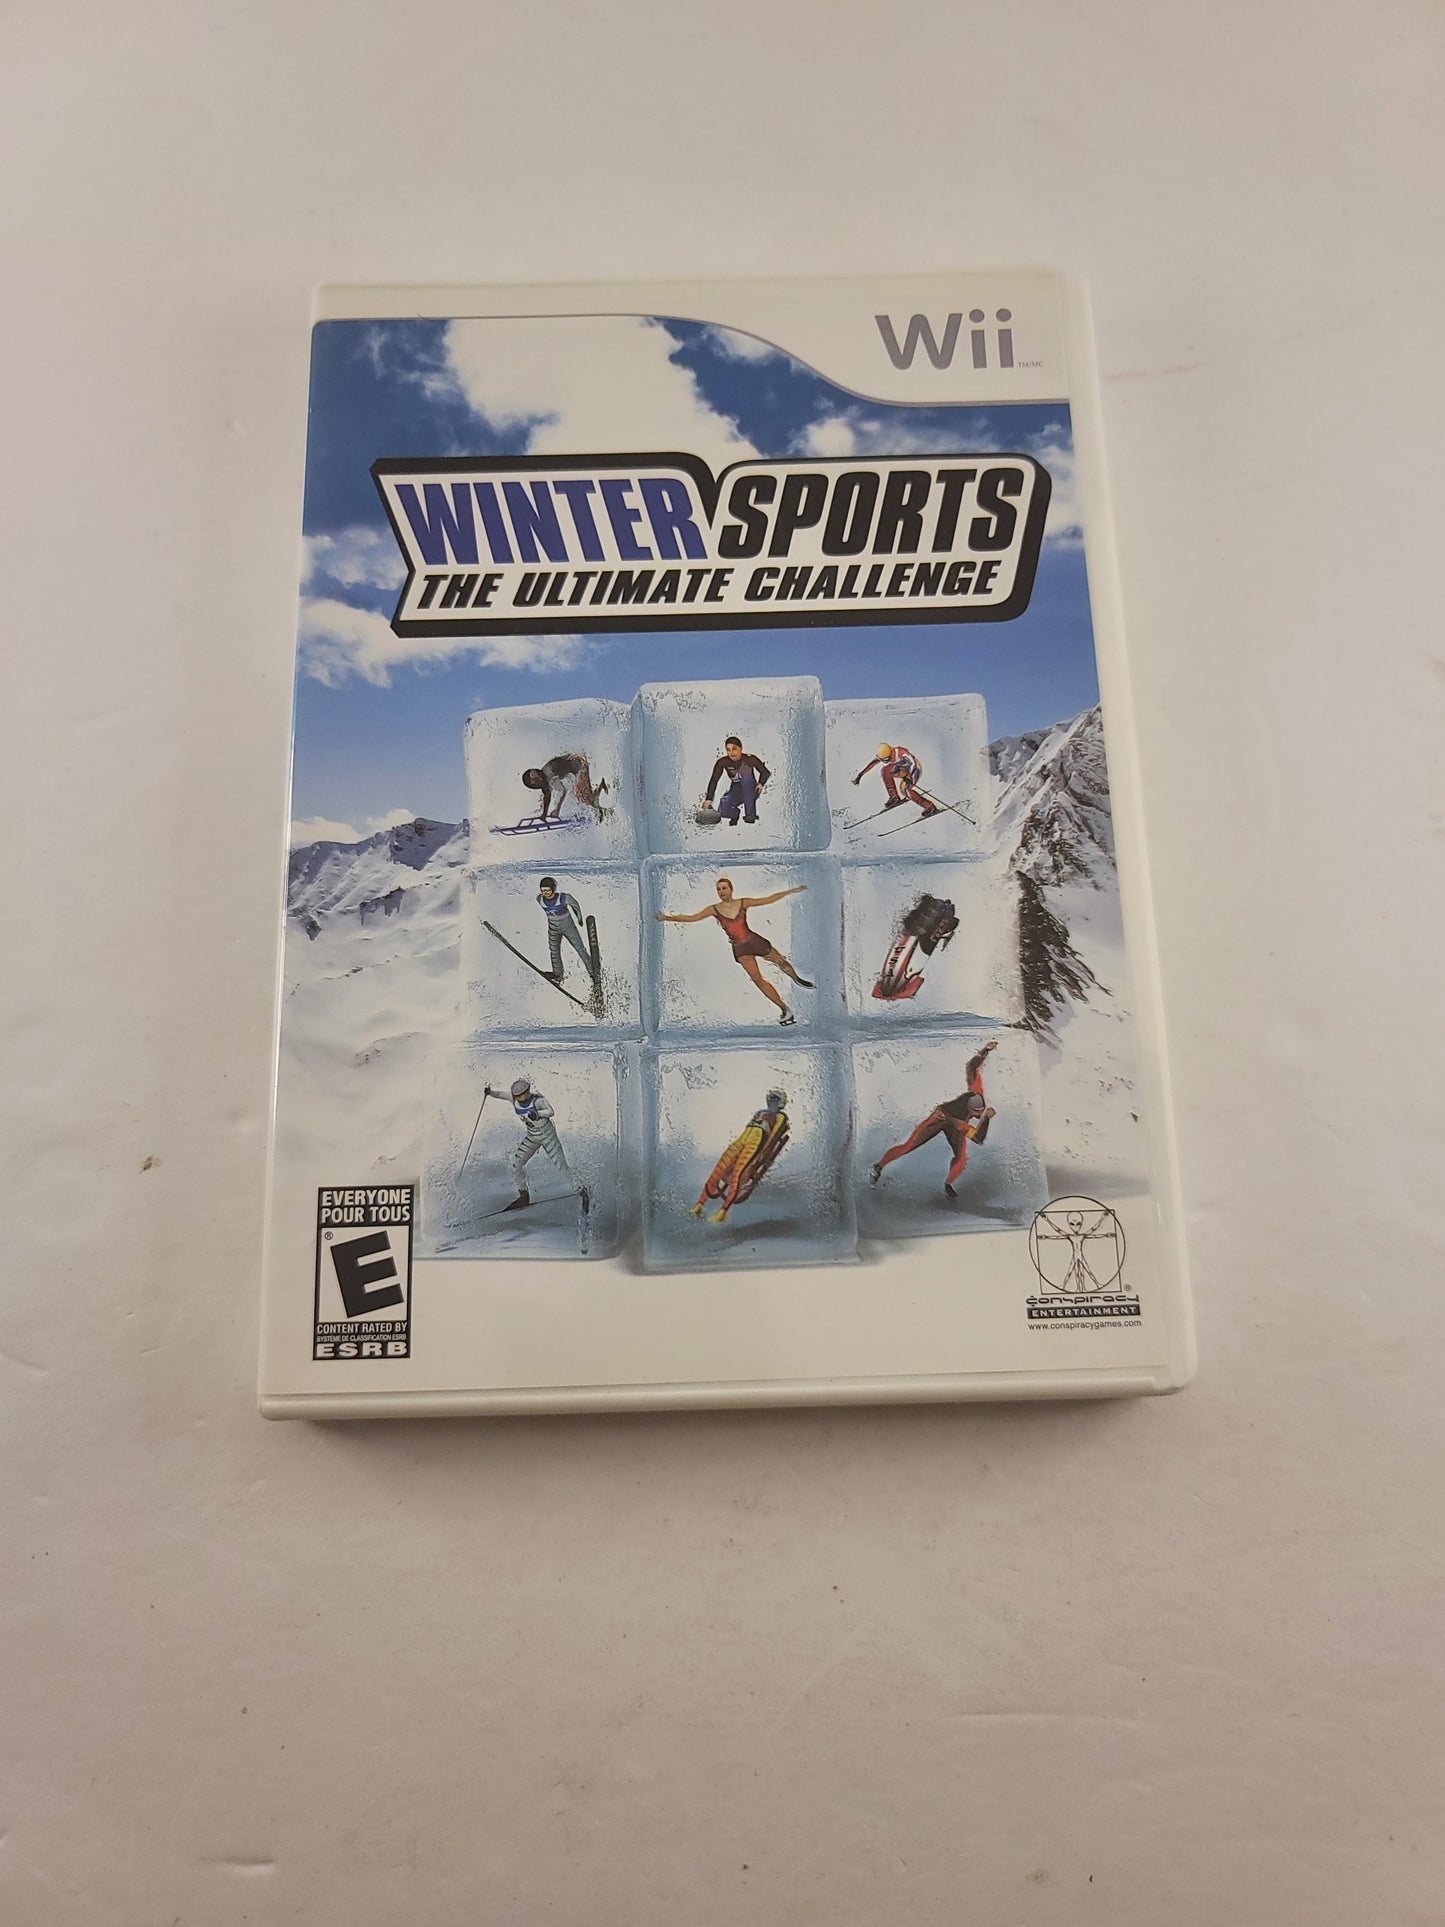 Winter Sports The Ultimate Challenge - Nintendo Wii